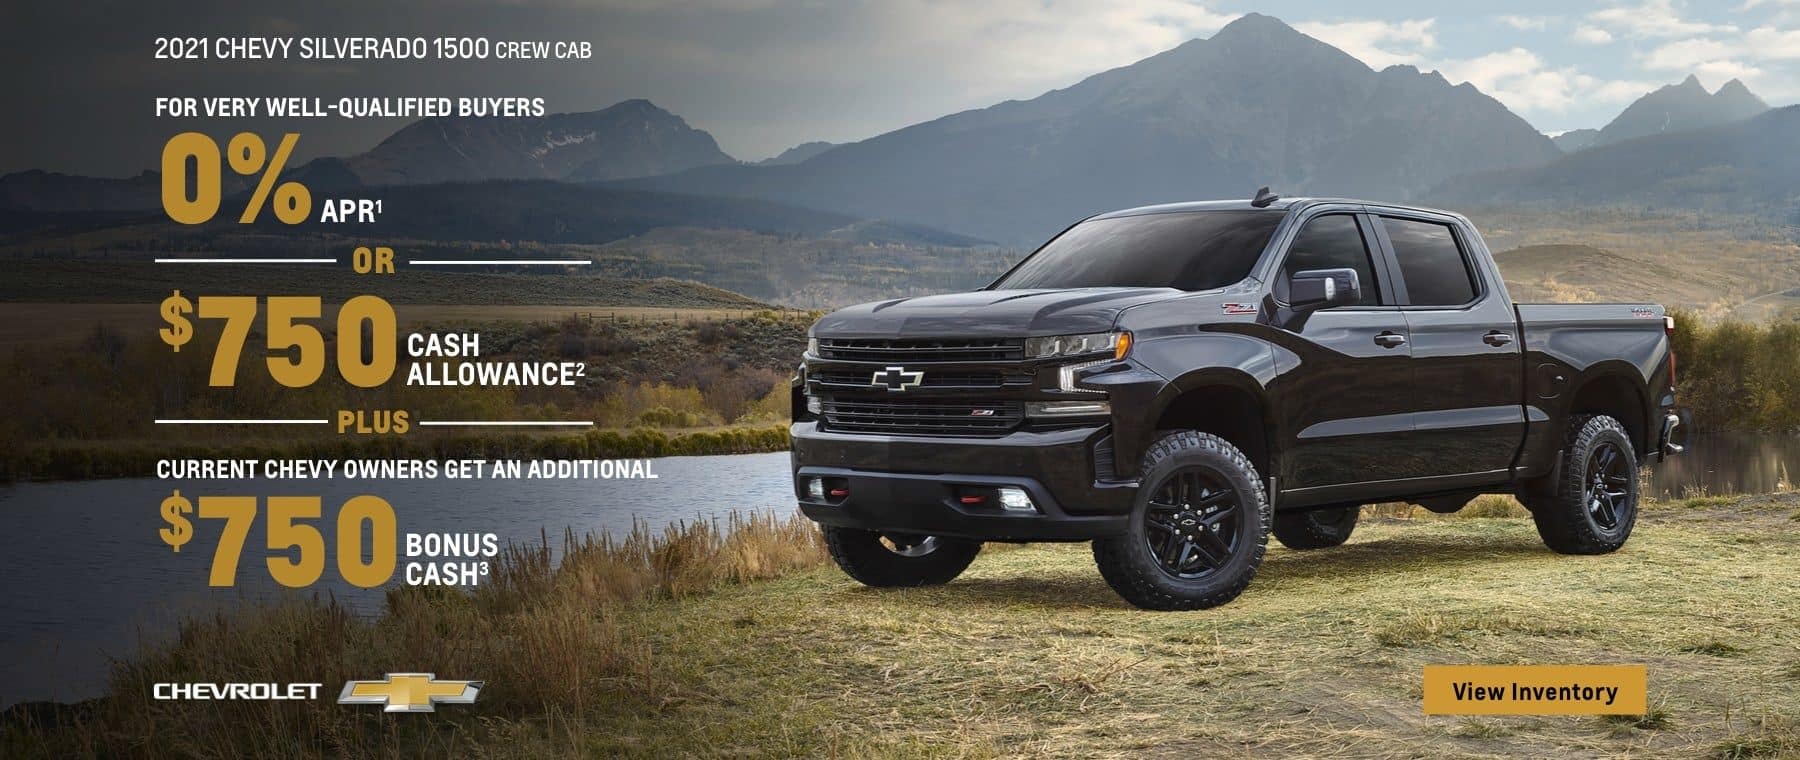 2021 Chevy Silverado 1500 Crew Cab. For very well-qualified buyers 0% APR. Or, $750 cash allowance. Plus, current Chevy owners get an additional $750 bonus cash.